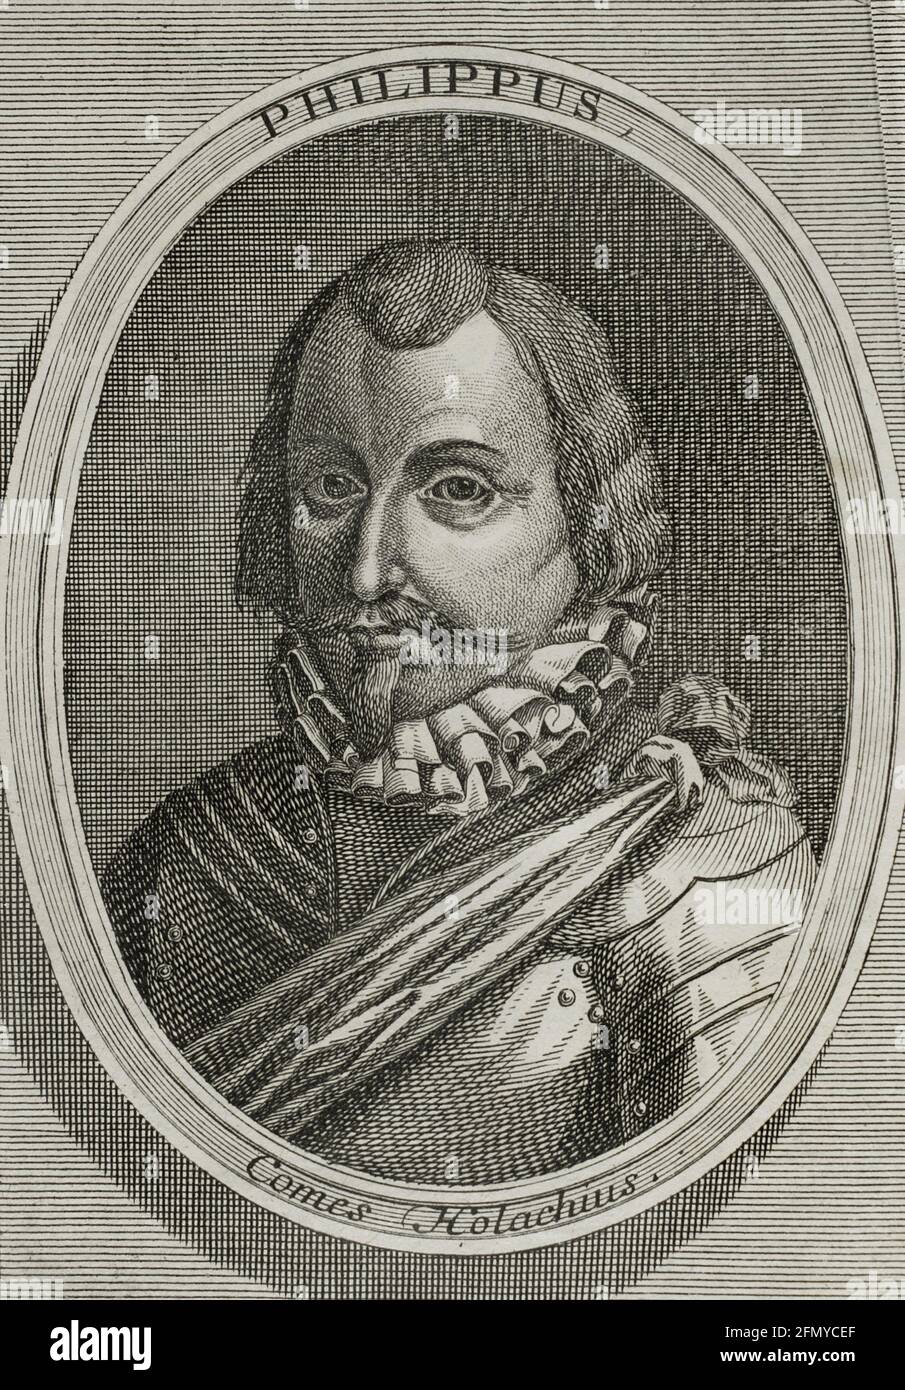 Philip of Hohenloe-Neuenstein (1550-1606), called Hollock. Count of Hohenloe-Langenburg. Dutch army commander in the service of the United Provinces of the Netherlands. Portrait. Engraving. Wars of Flanders. Edition published in Antwerp, 1748. Stock Photo